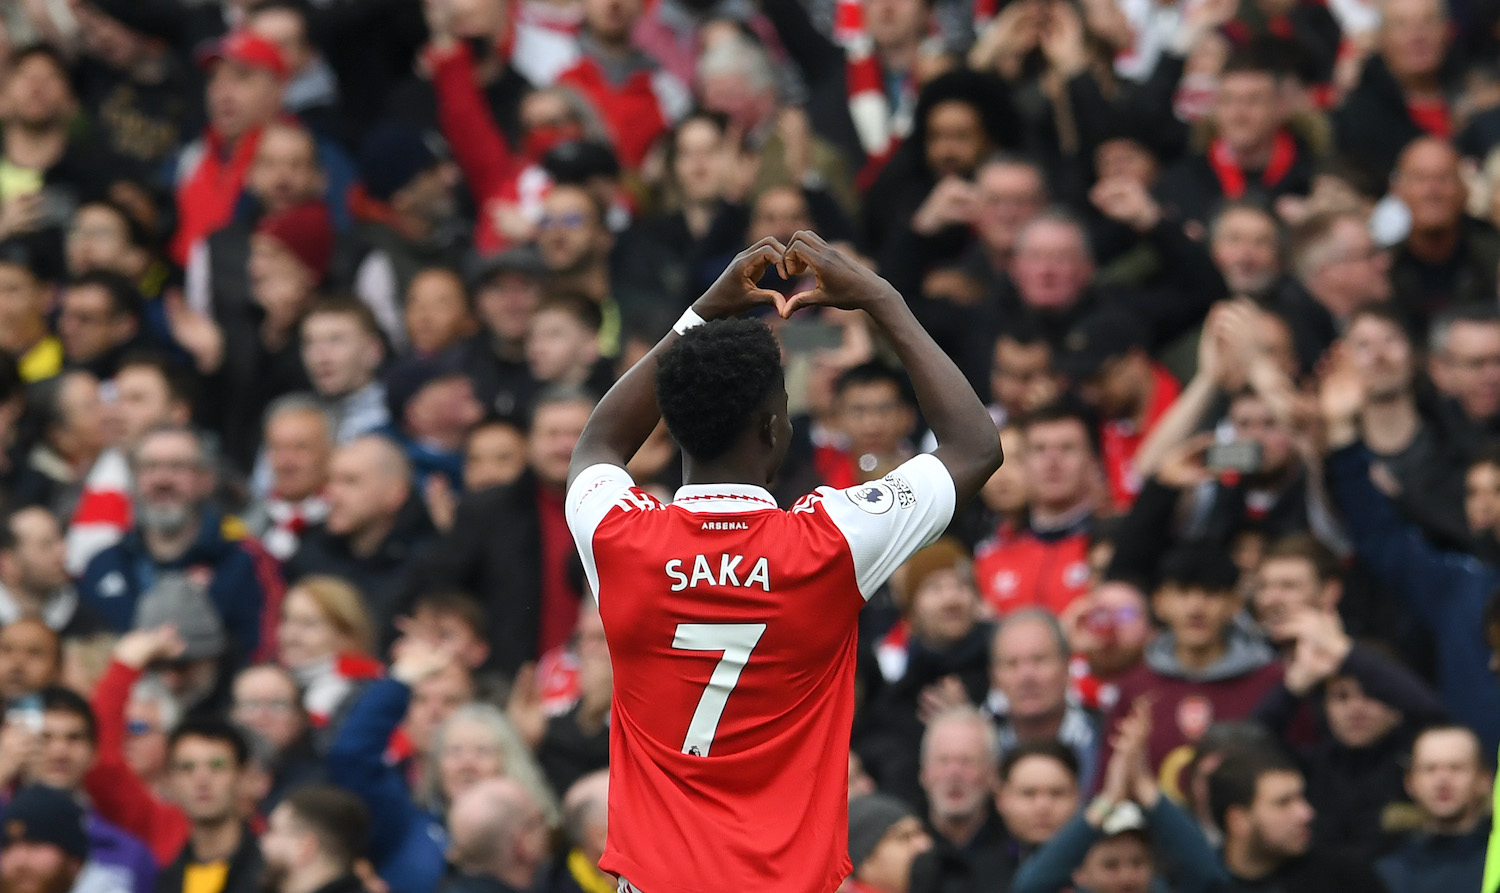 LONDON, ENGLAND - MARCH 19: Bukayo Saka celebrates scoring Arsenal's 4th goal during the Premier League match between Arsenal FC and Crystal Palace at Emirates Stadium on March 19, 2023 in London, England. (Photo by David Price/Arsenal FC via Getty Images)